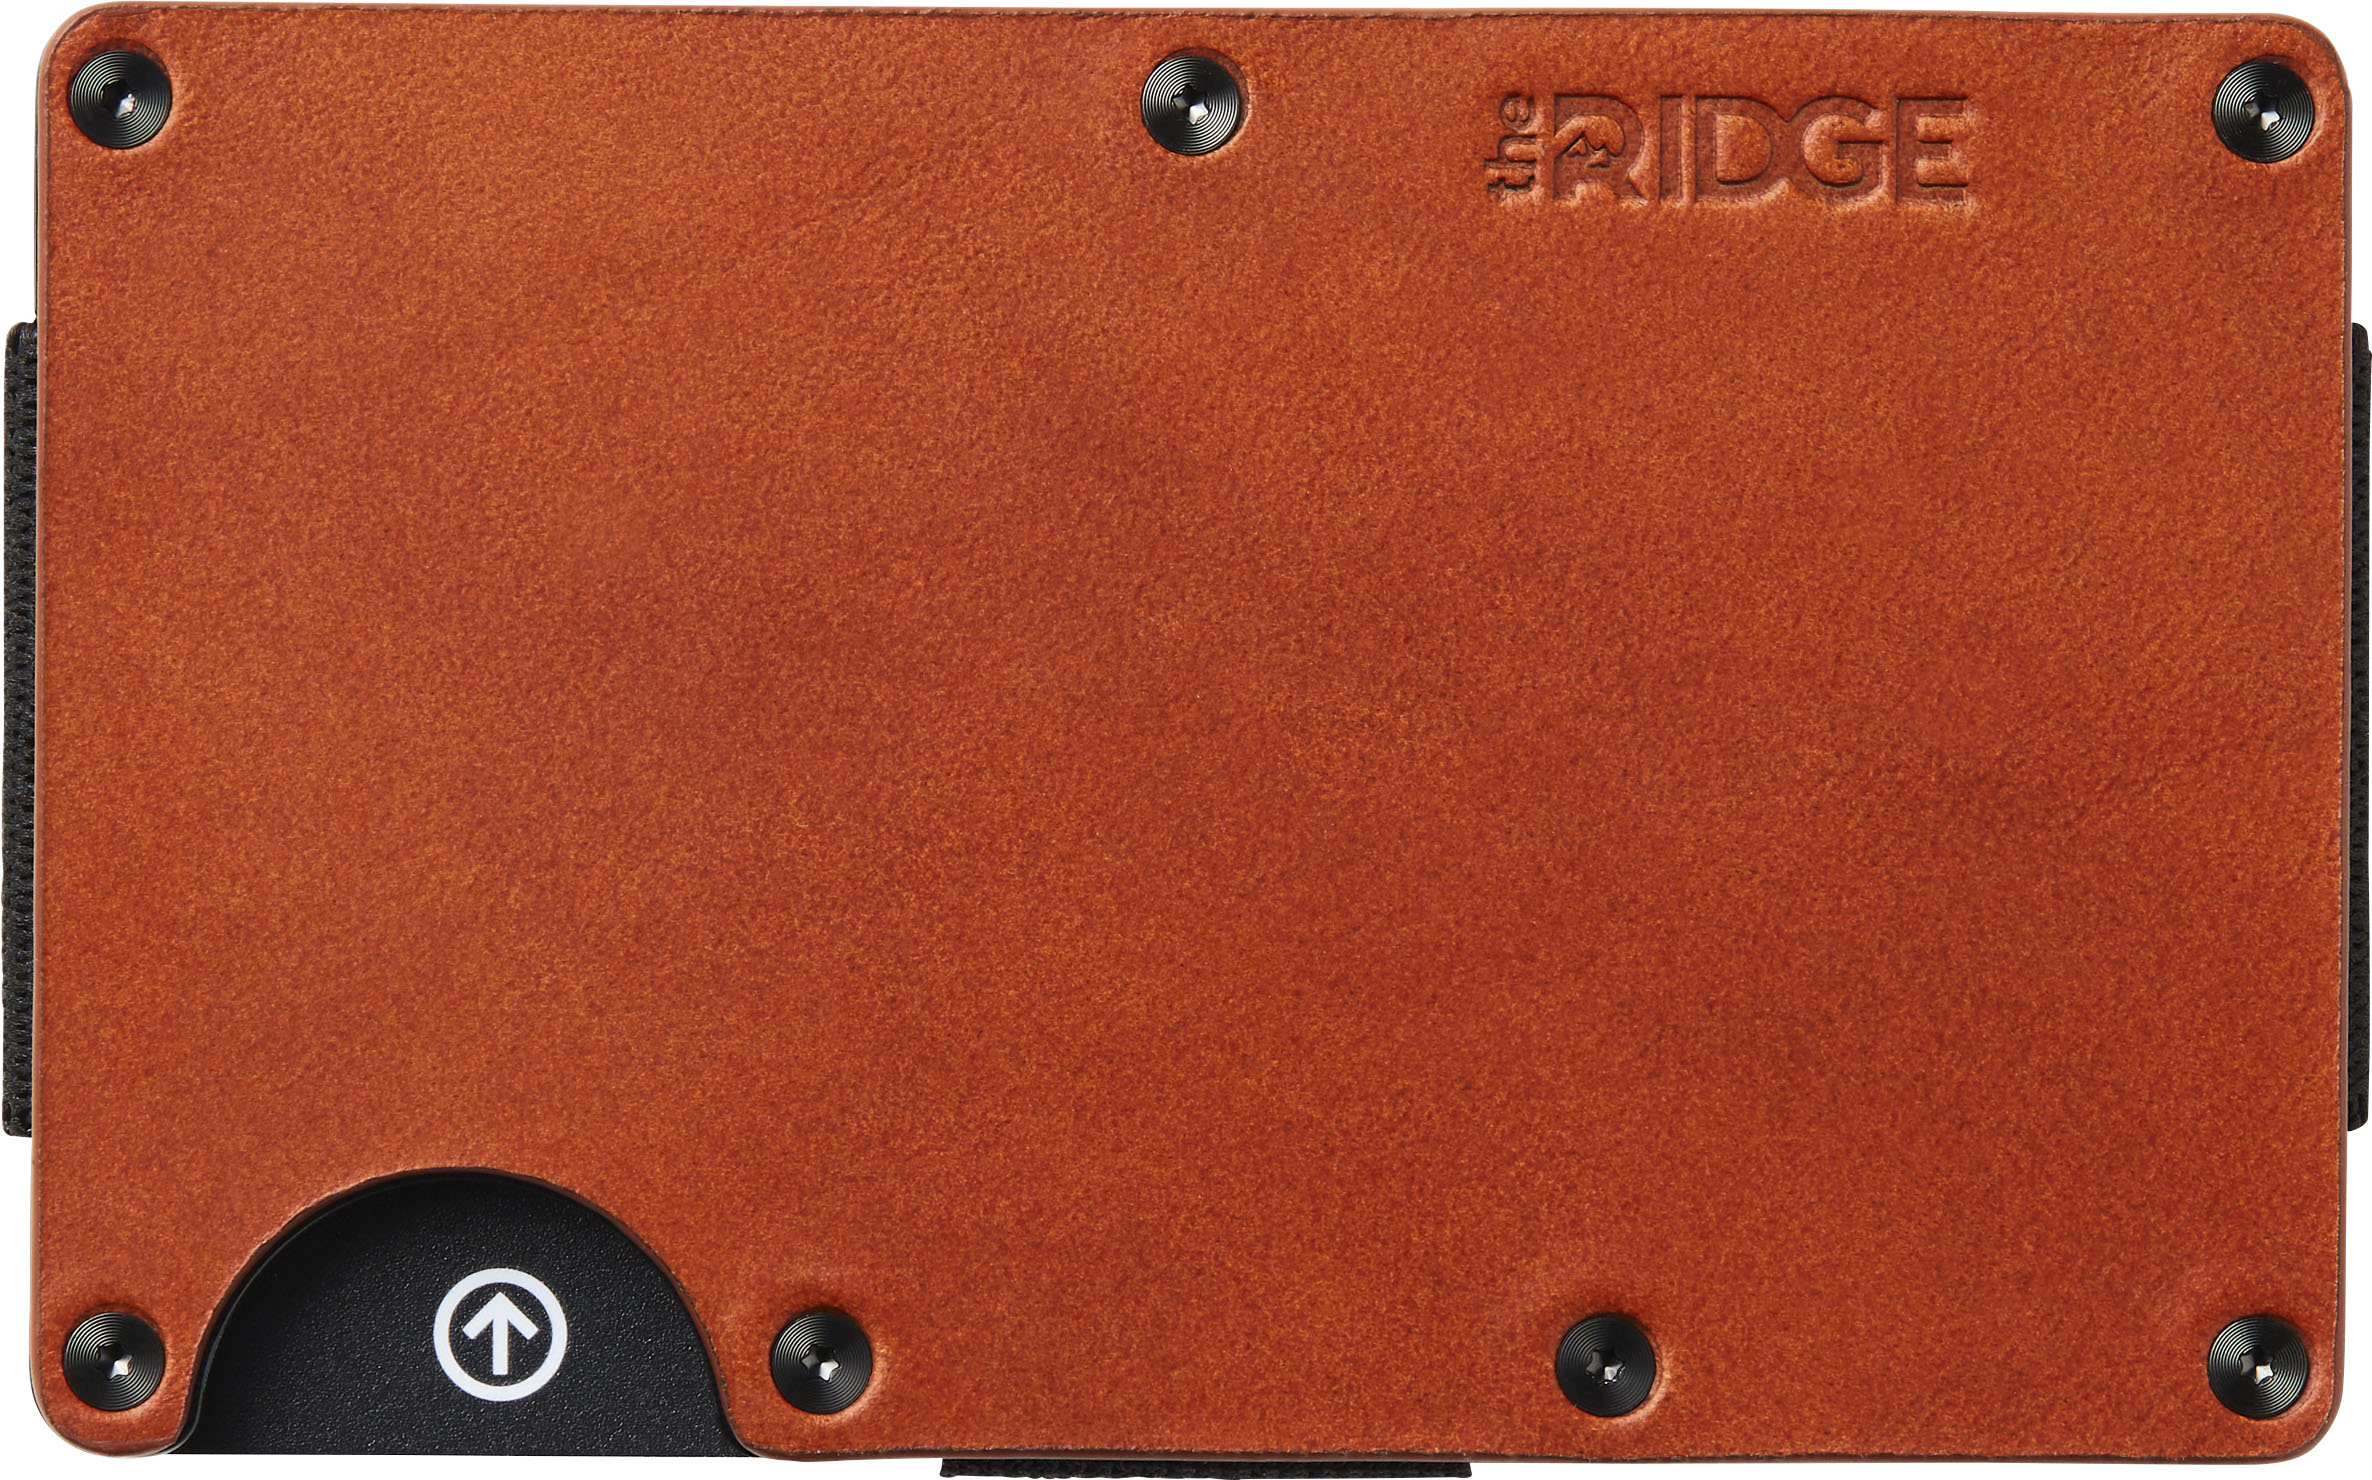 Put your pocket in order with the Ridge Wallet - Wristwatch Review